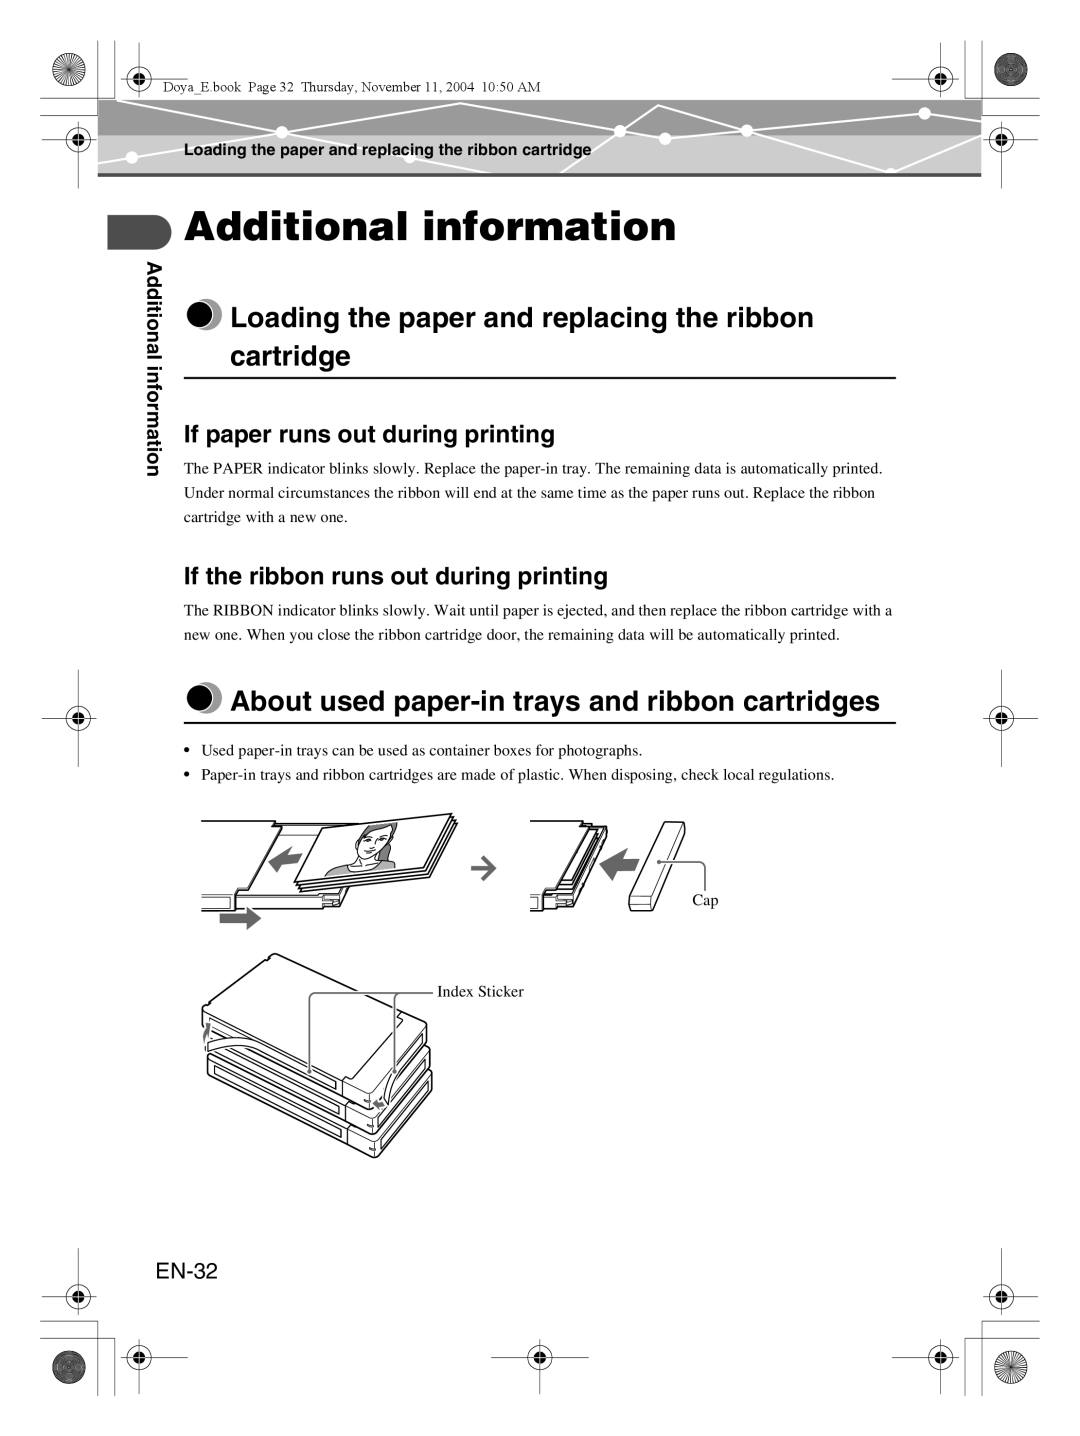 Olympus P-S100 user manual Additional information, Loading the paper and replacing the ribbon cartridge, EN-32 